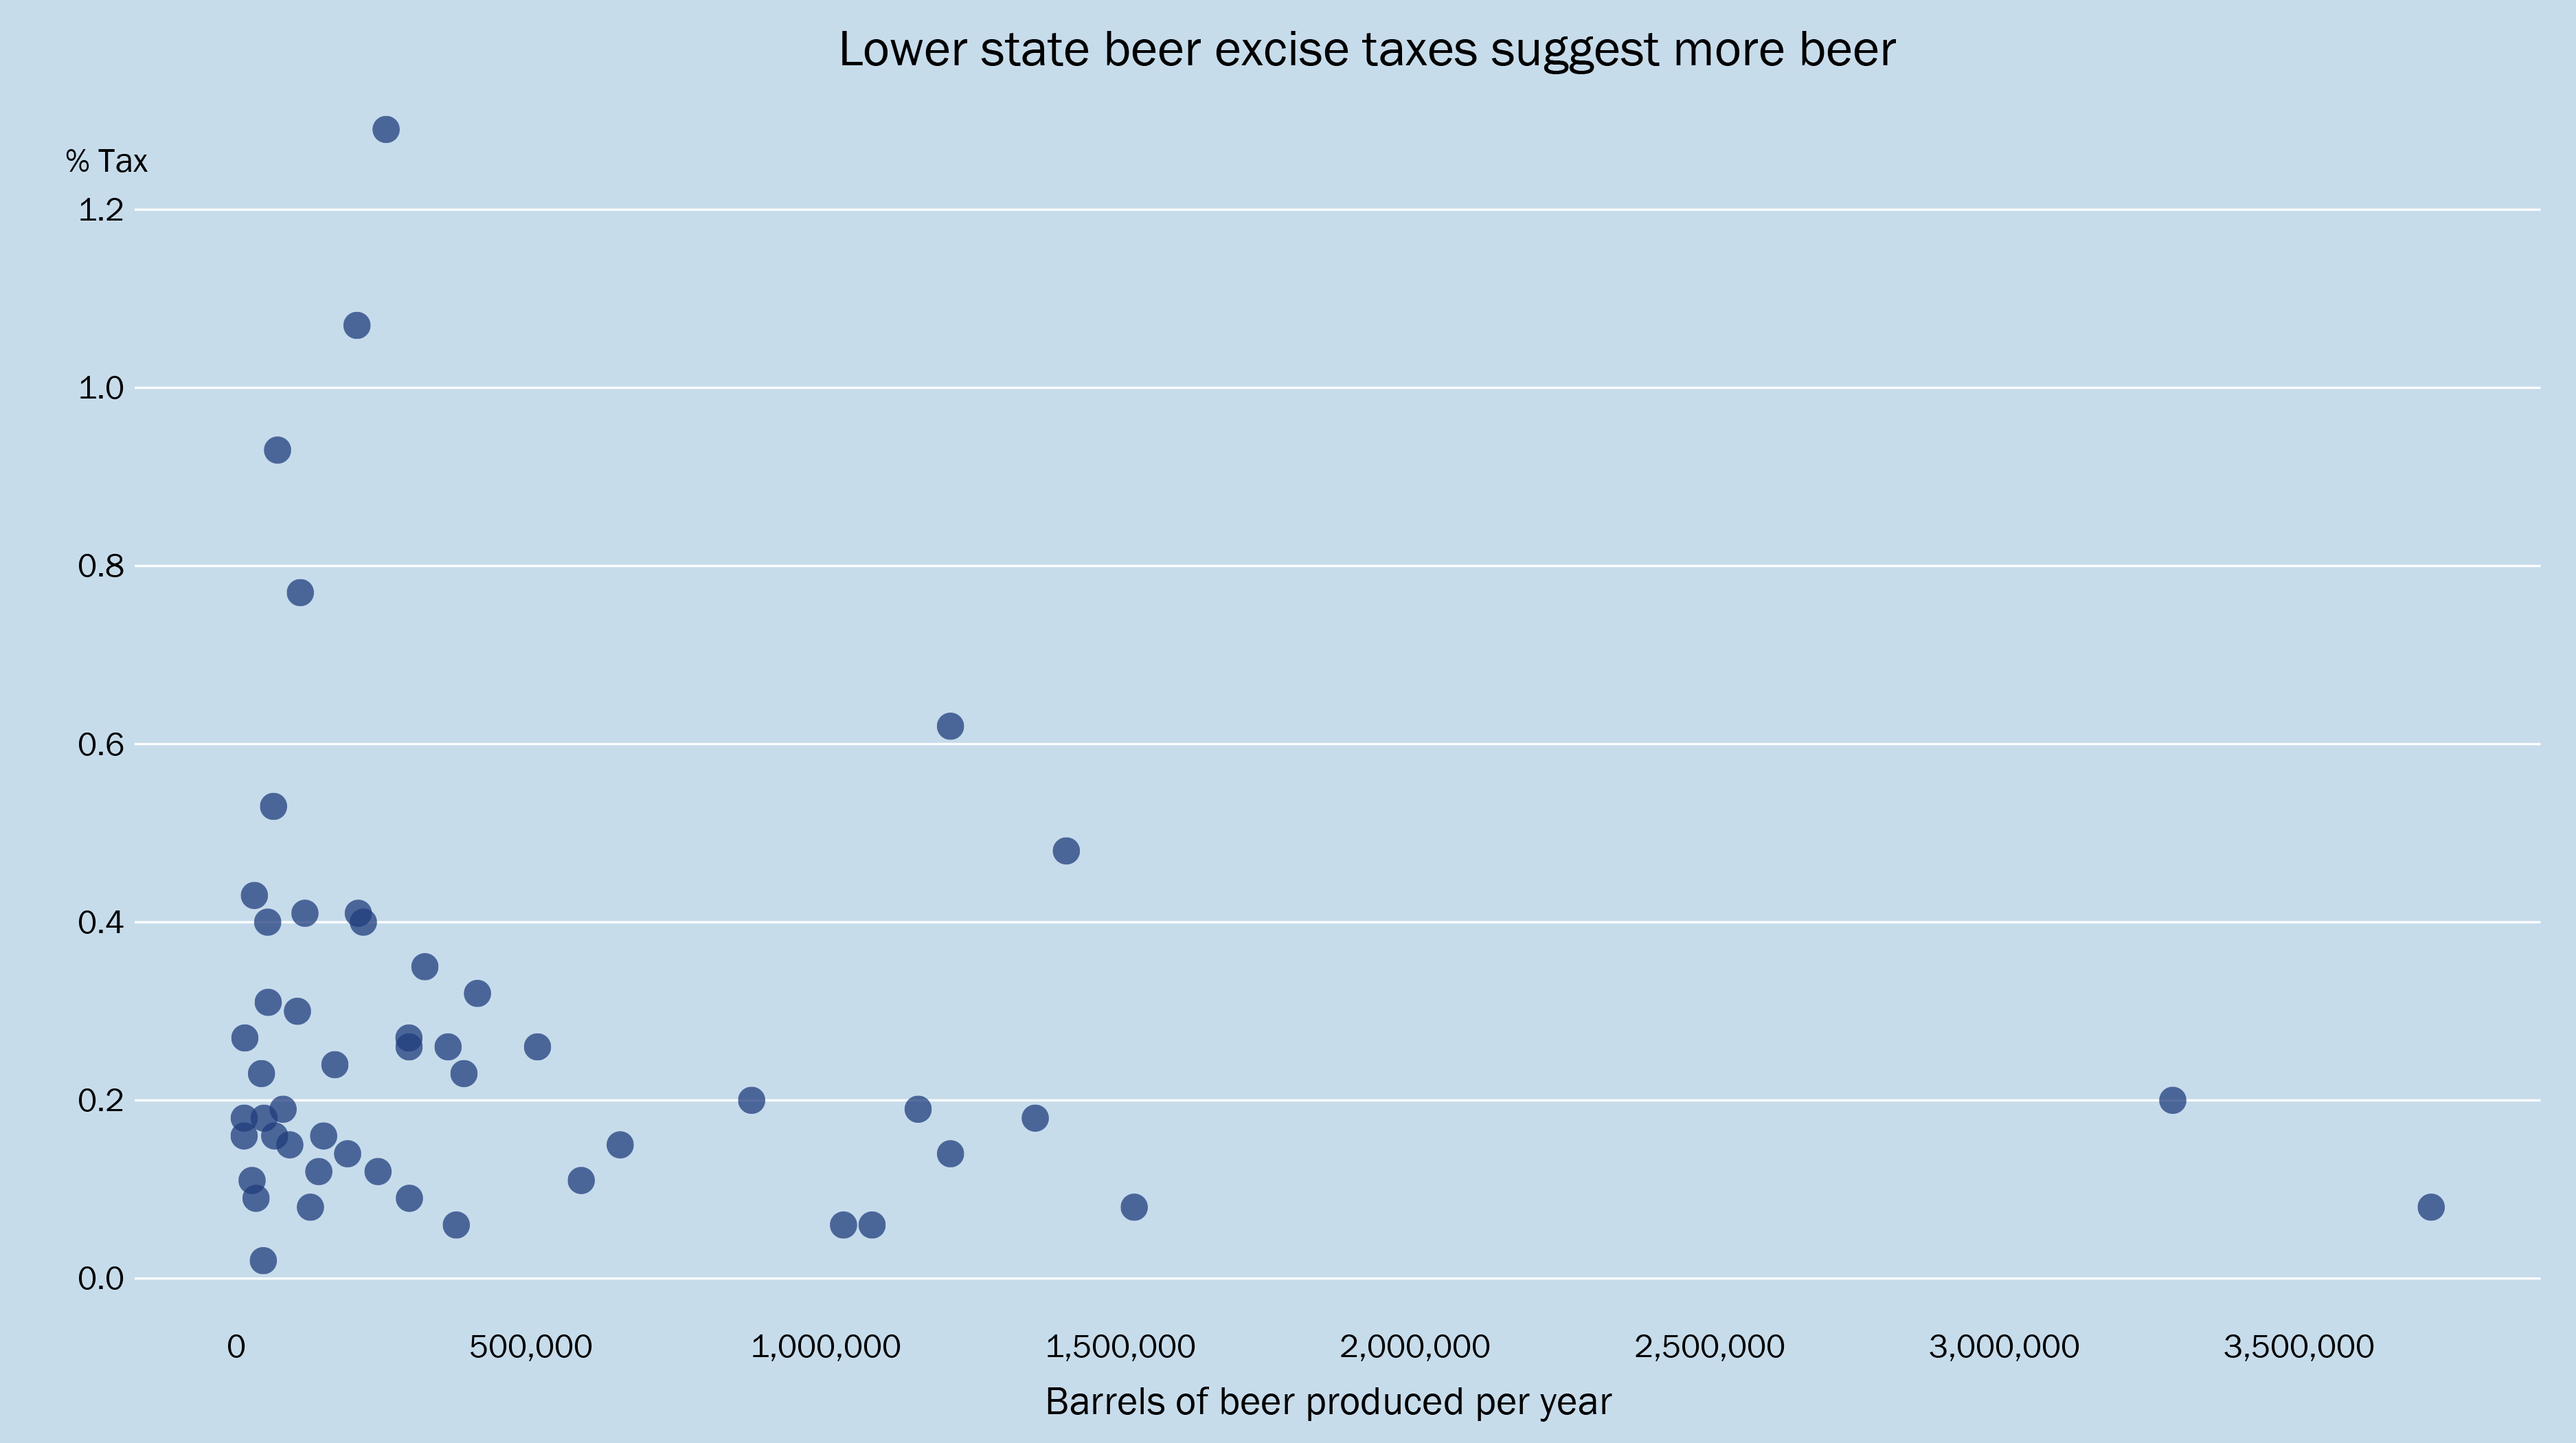 Scatterplot of excise tax charted against beer production for each state.